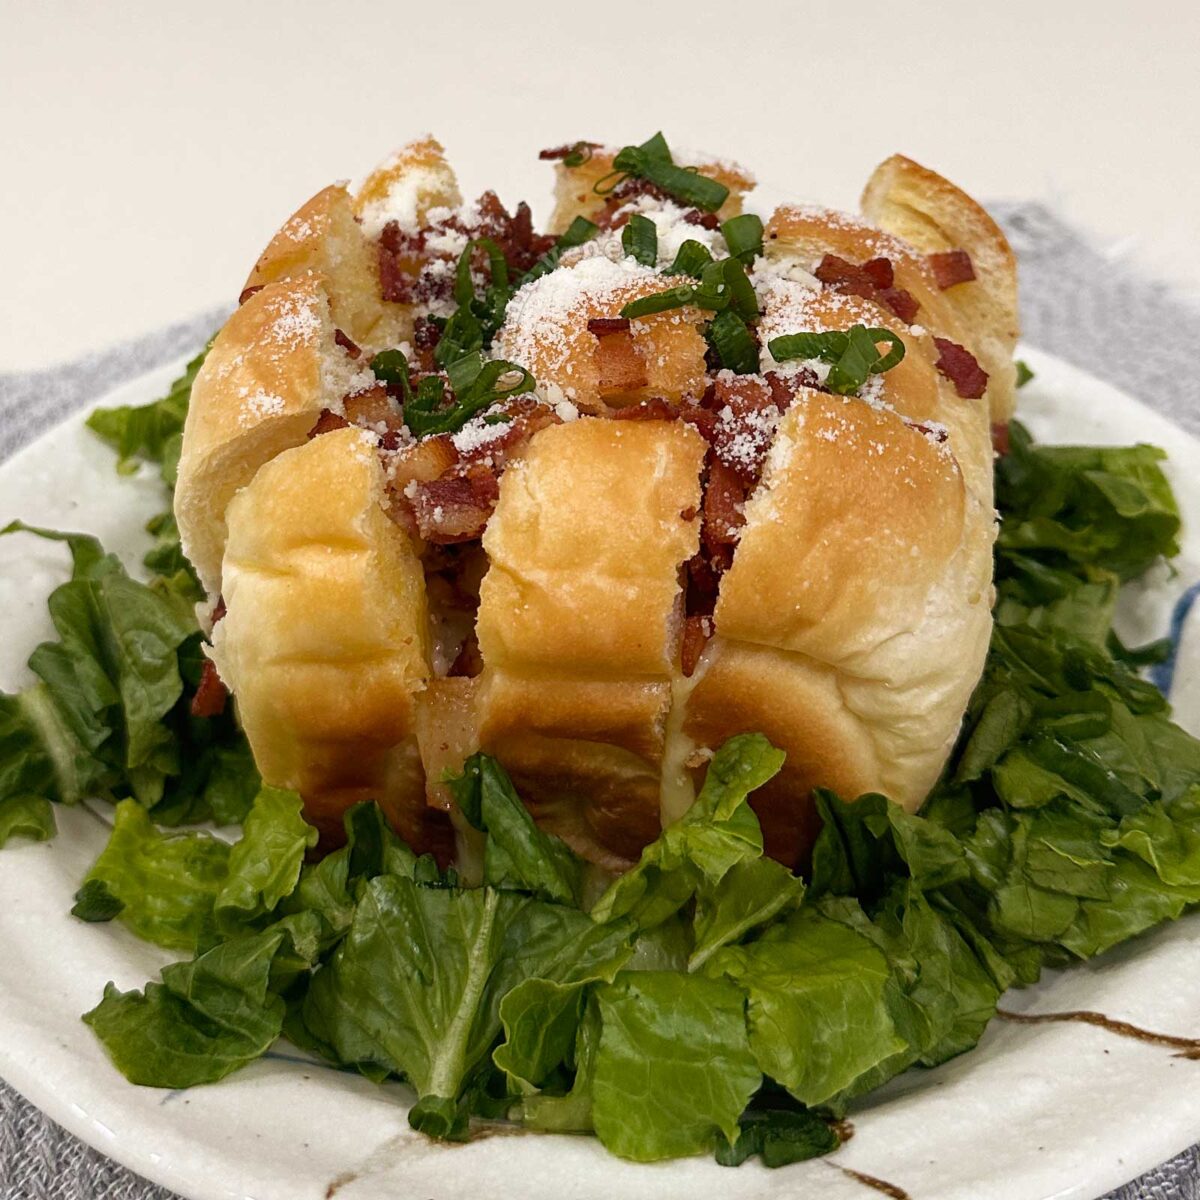 Blooming bread with bacon and cheese